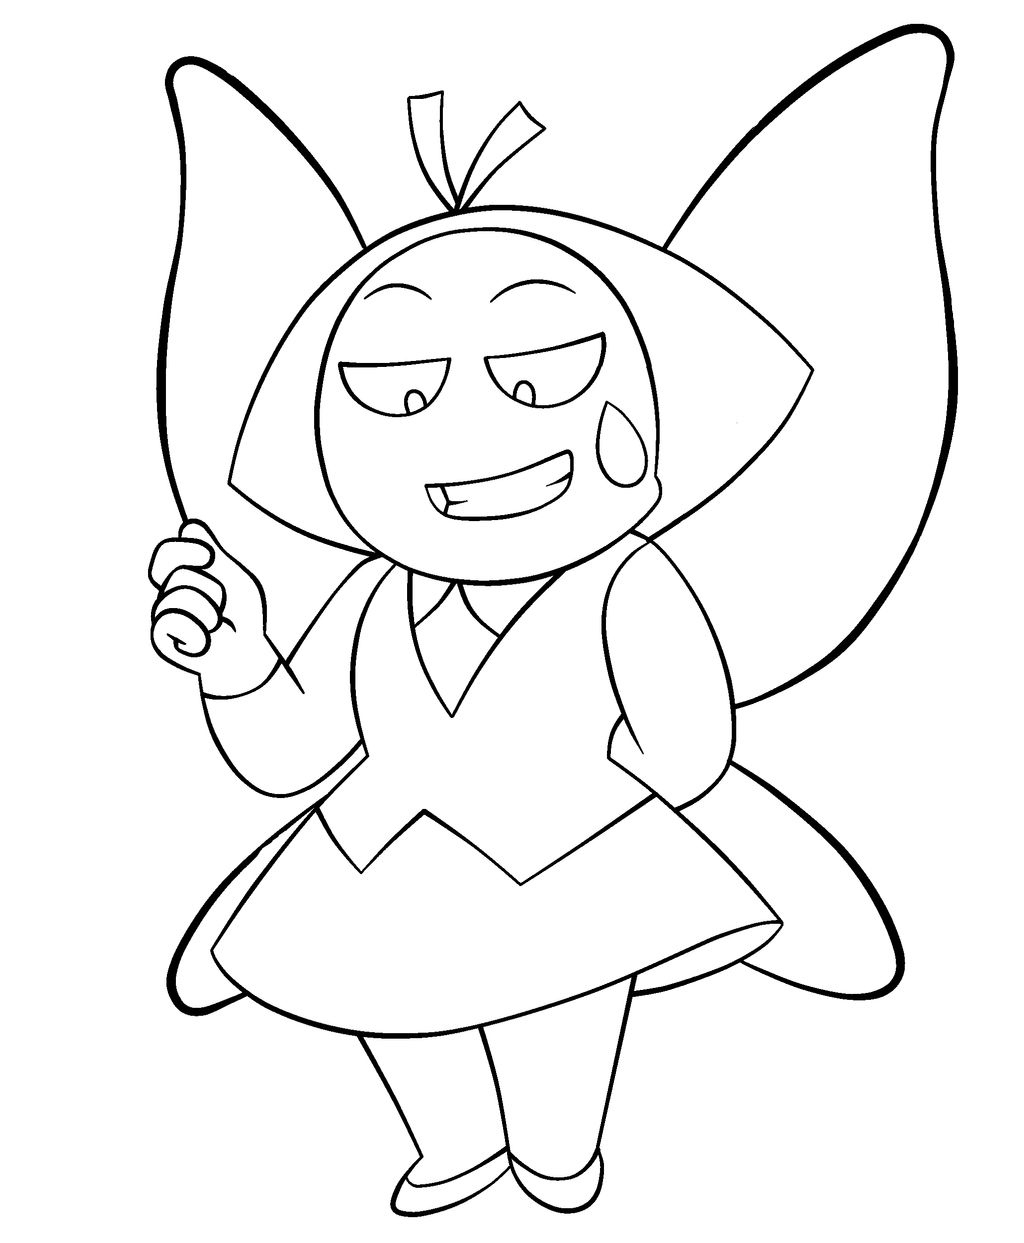 Download Aquamarine Coloring Page Steven Universe by sanorace on DeviantArt